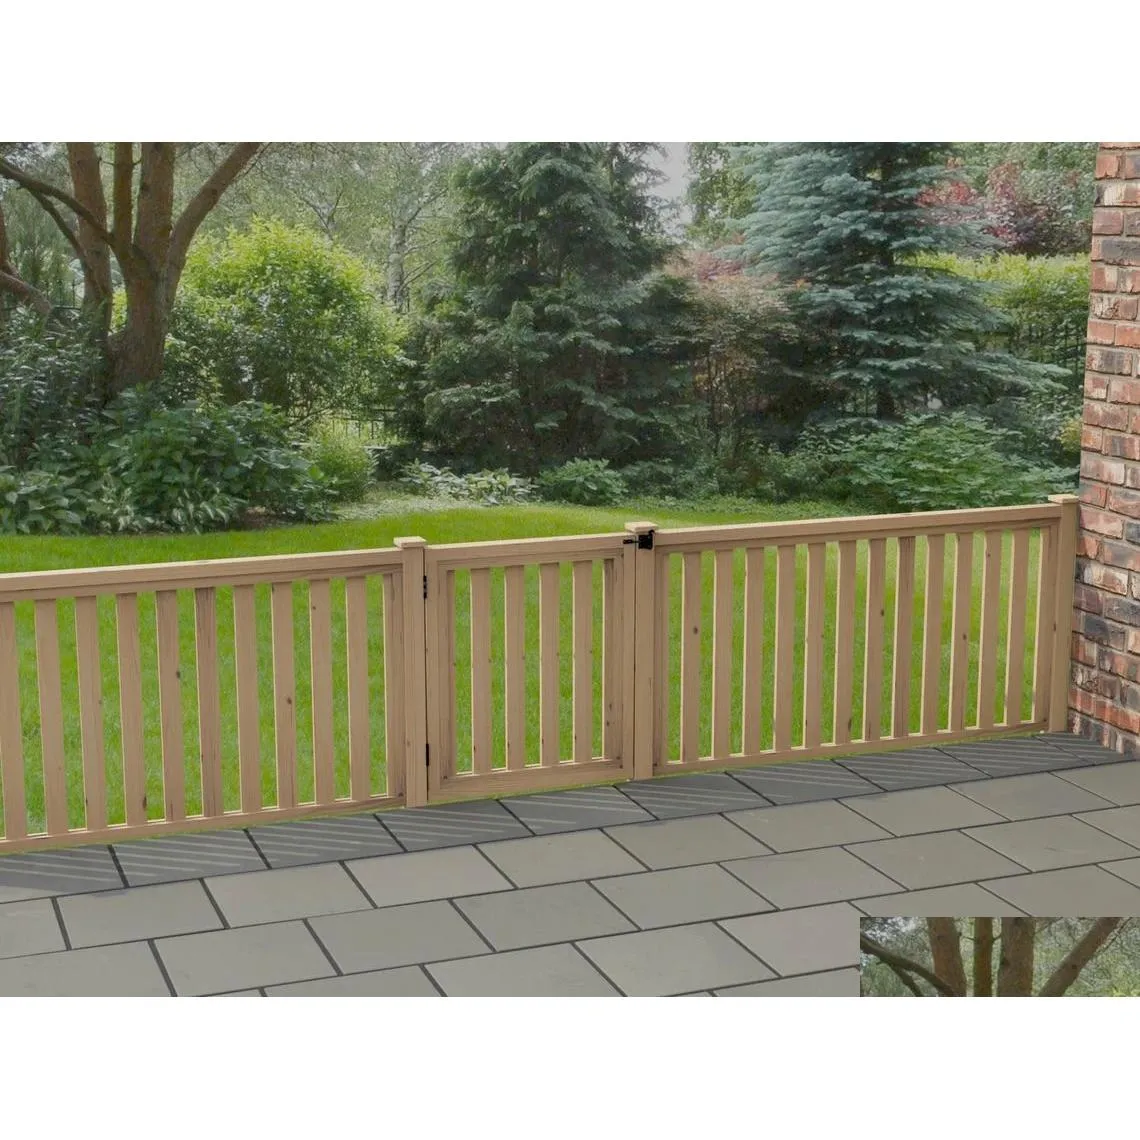 modular garden fencing and gate system 950mm high diy woodwork plans only no materials uk metric